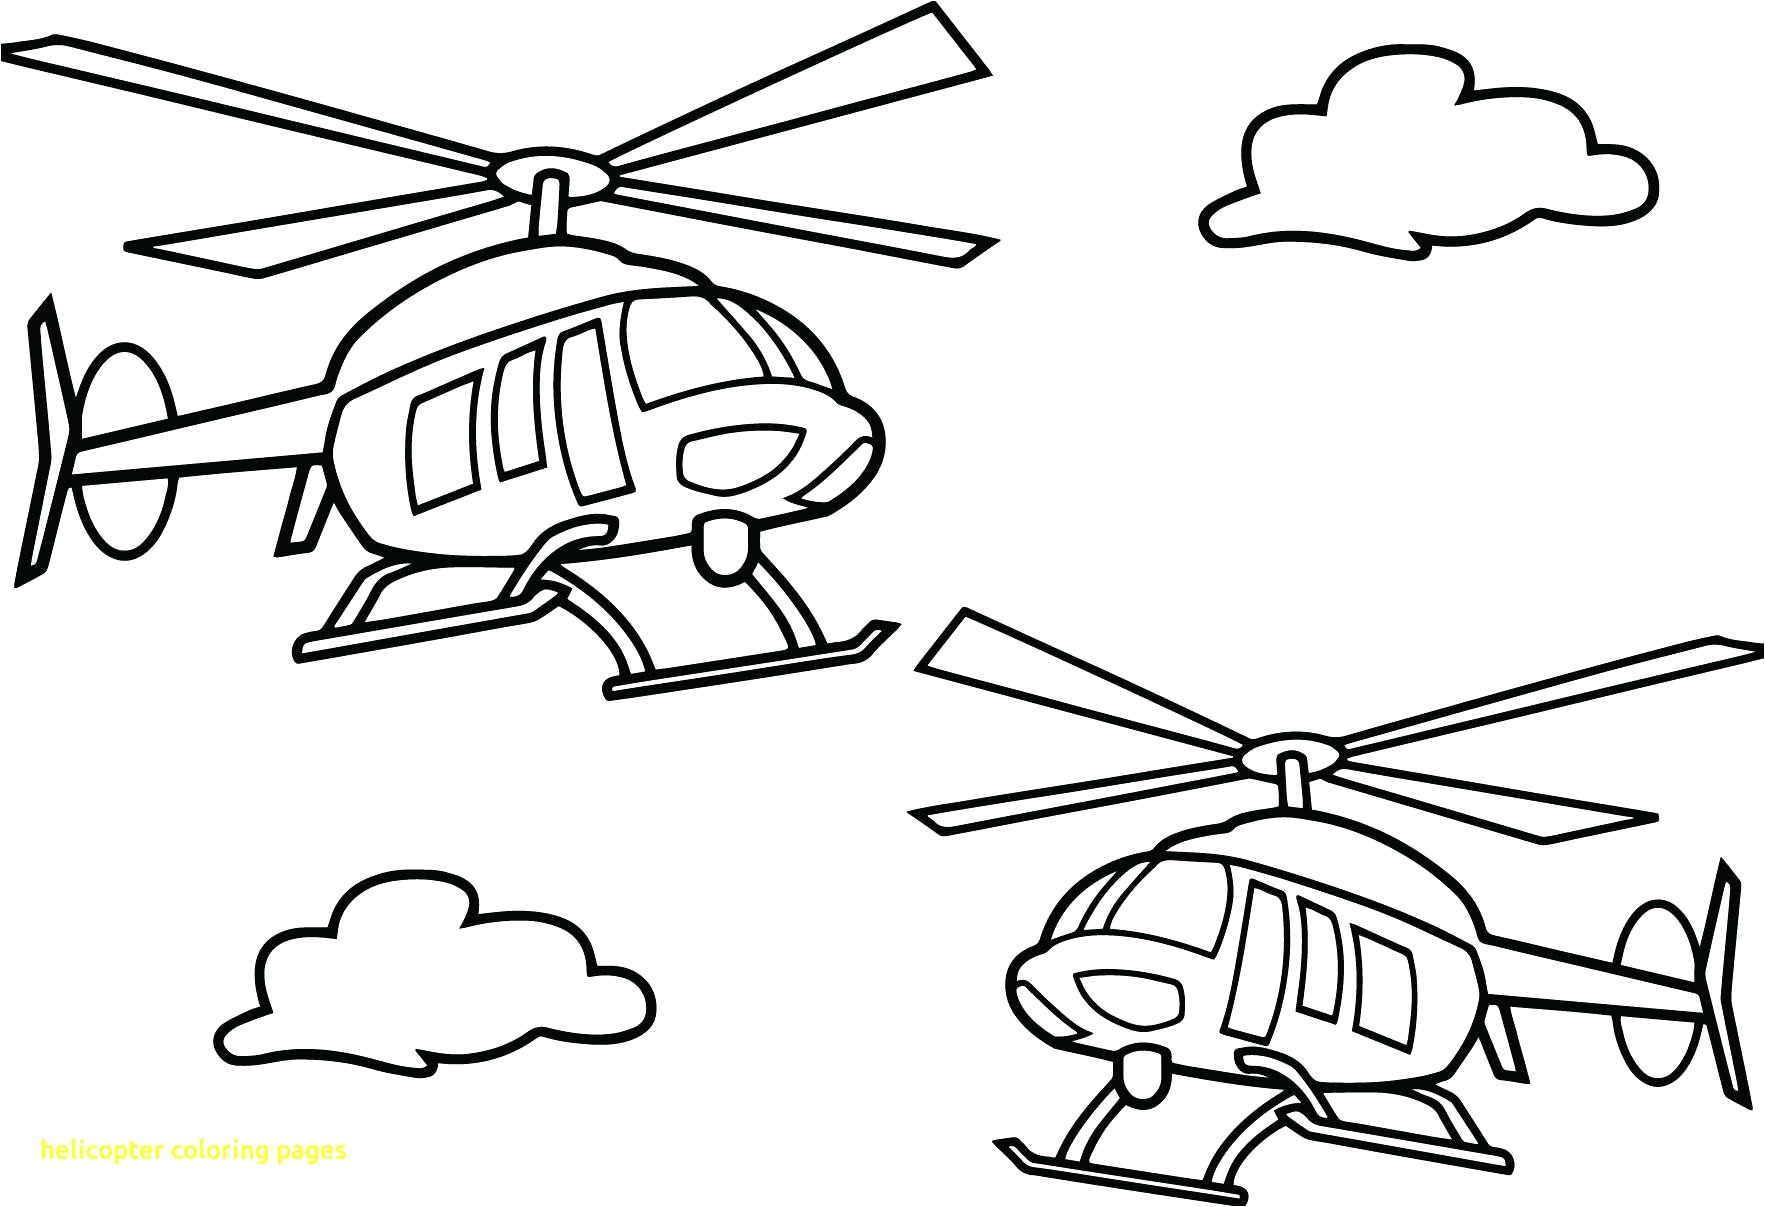 selected helicopter coloring pages police colors for kids with vehicles coloring pages with colors coloring pages